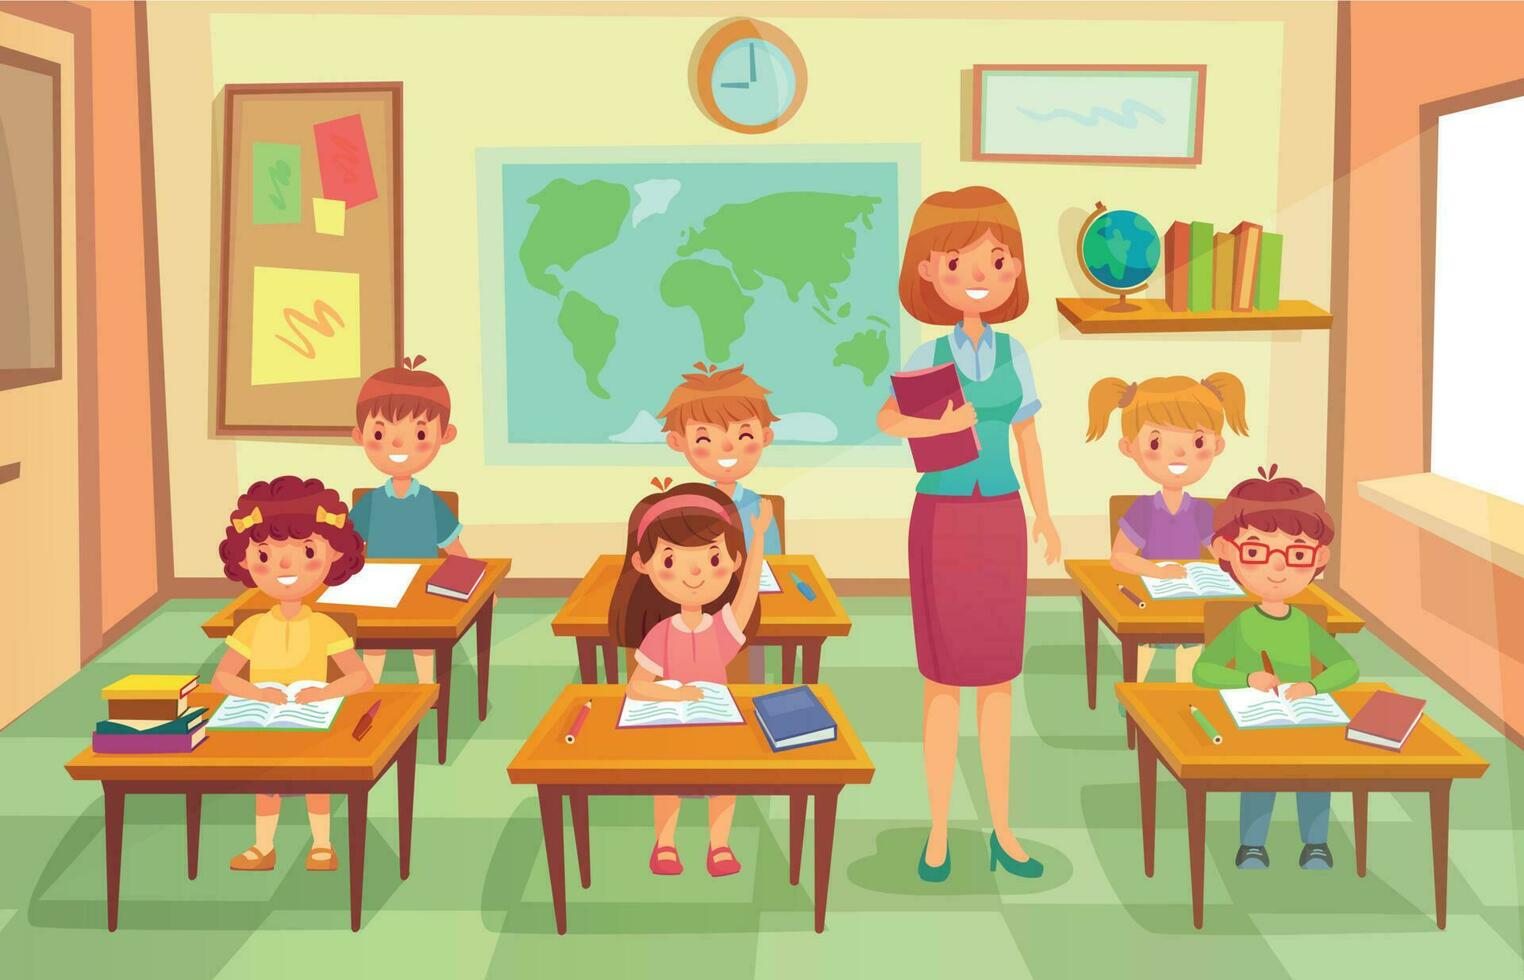 Pupils and teacher in classroom. School pedagogue teach lesson to pupil kids. Schools lessons at class cartoon vector illustration